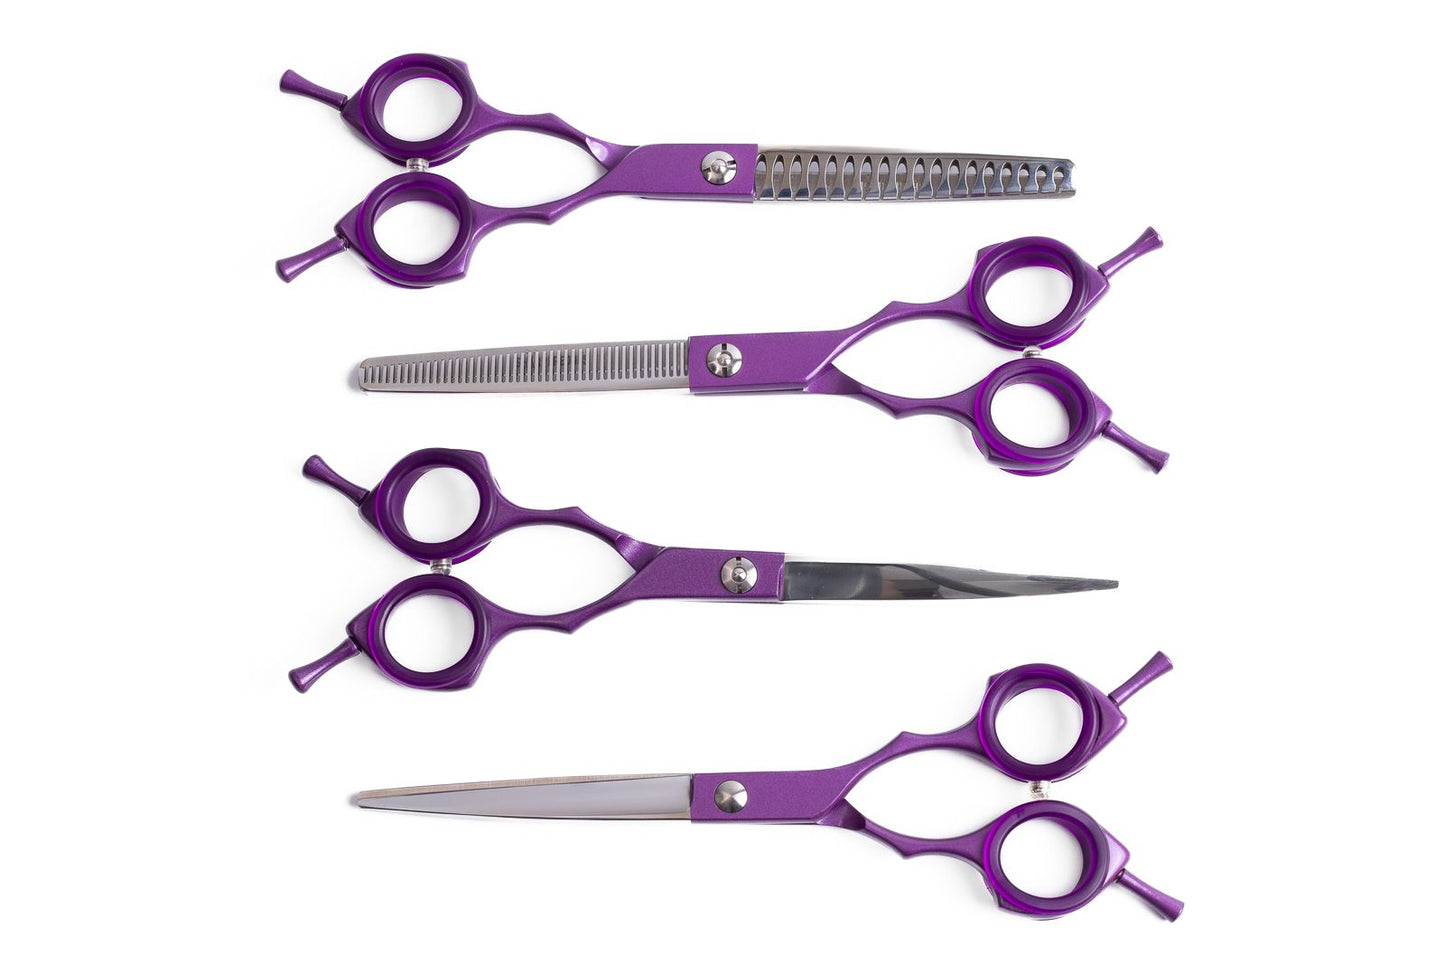 Viola 6.5" set of 4 Scissors (Right Hands) with case and Free Comb